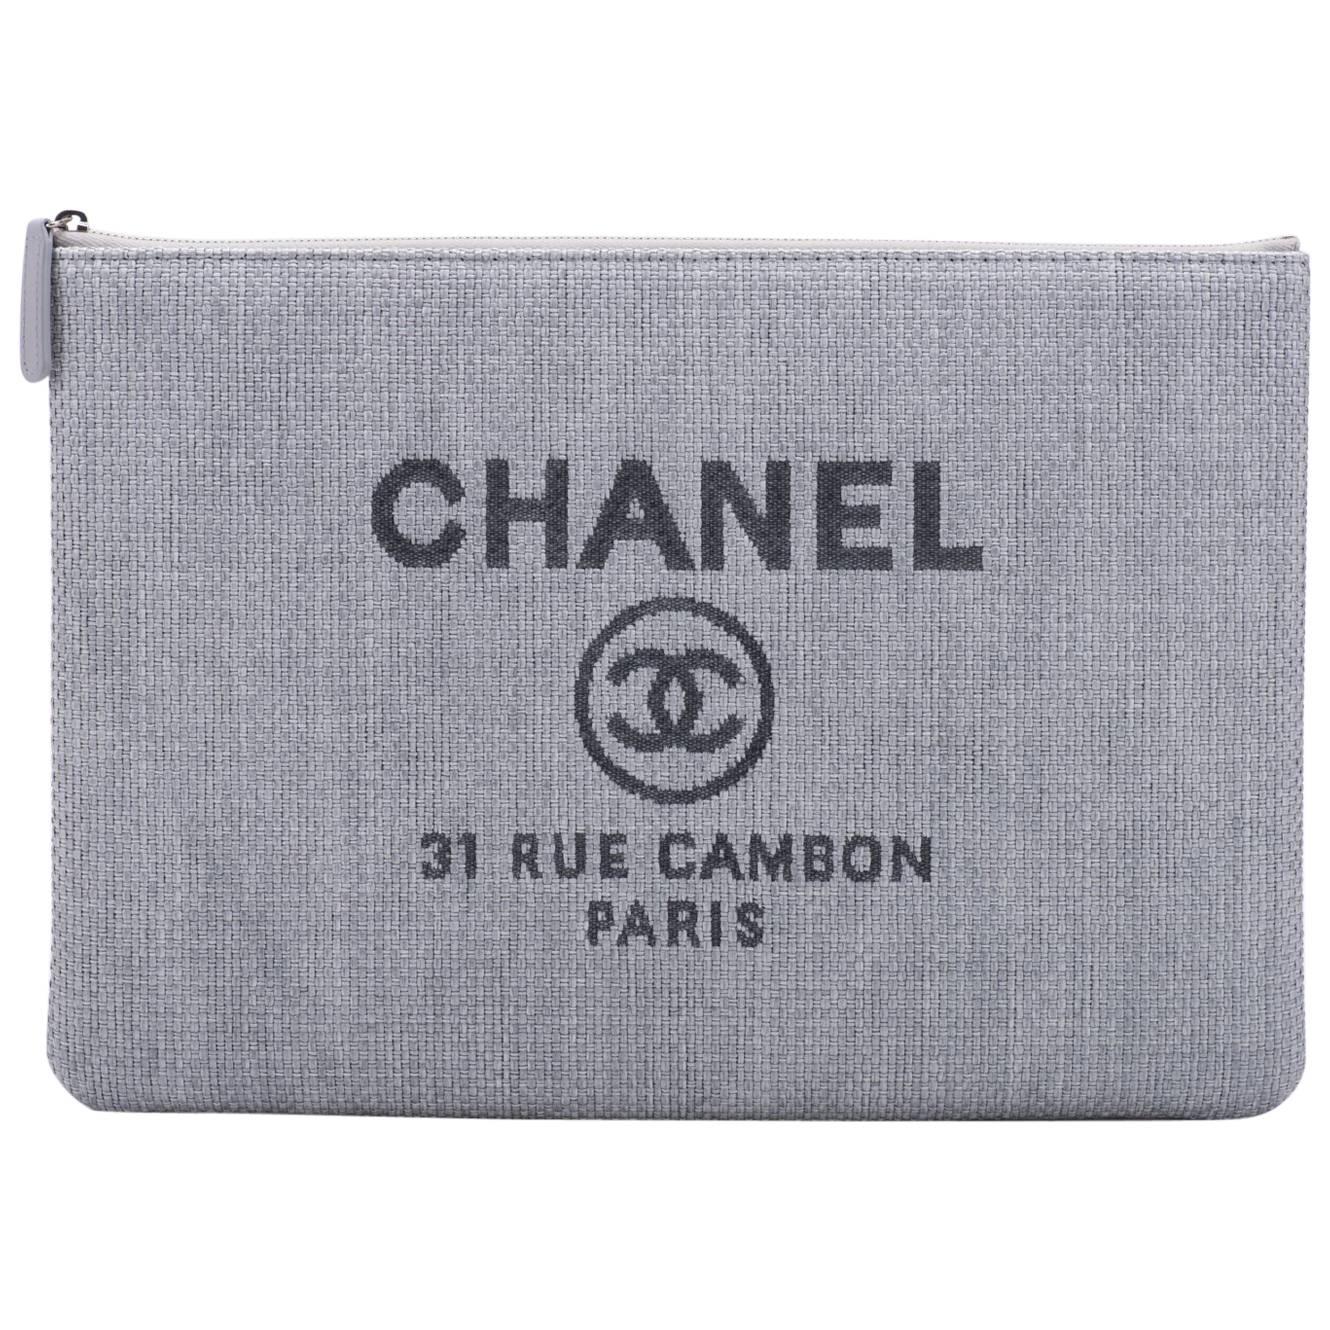 New in Box Chanel Large Linen Blue Clutch